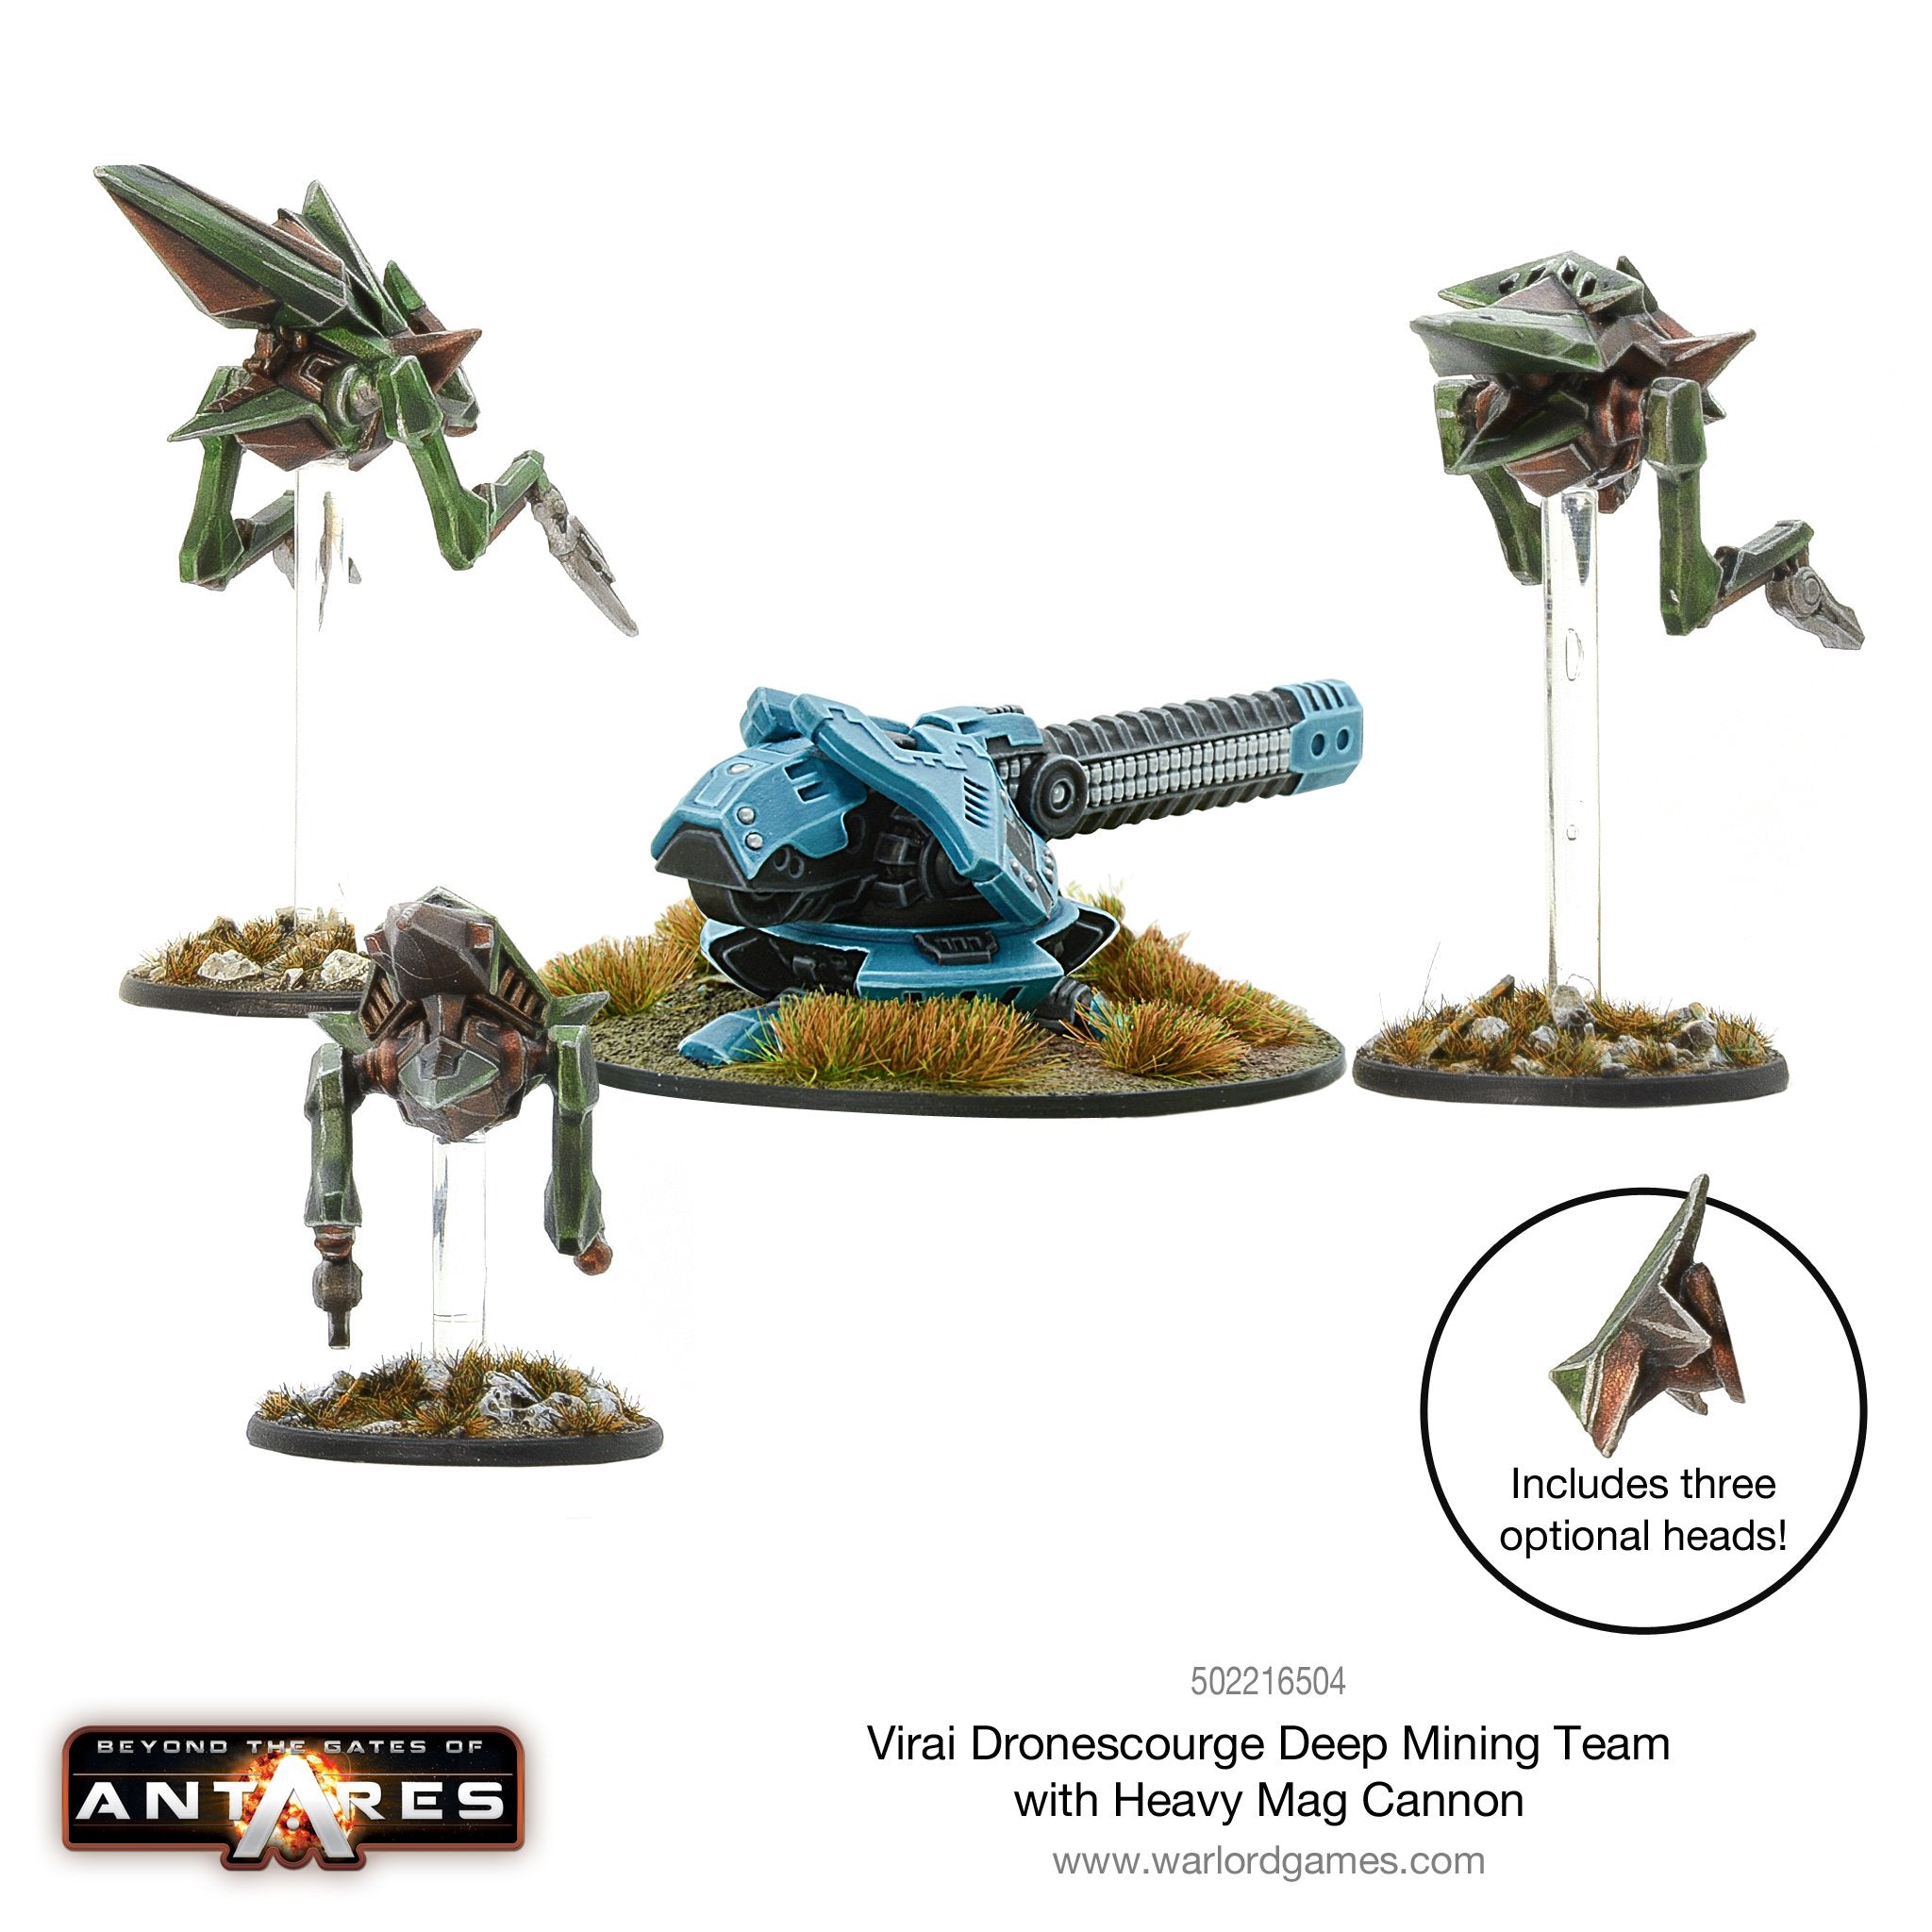 Virai Dronescourge Deep mining team with heavy mag cannon